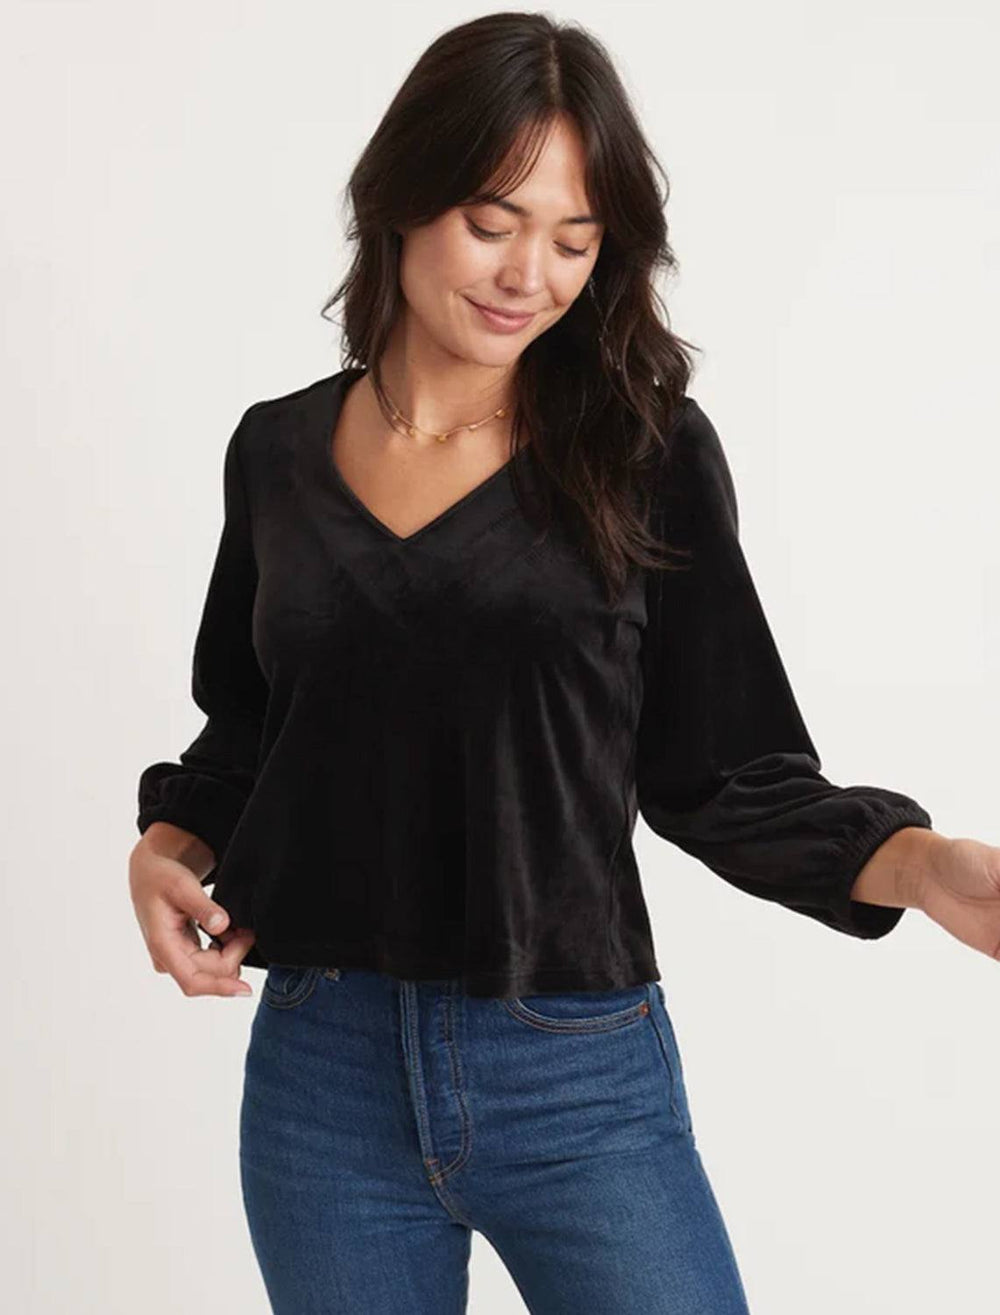 Model wearing Marine Layer's velour v neck top in black. Model pairs the shirt with blue jeans.